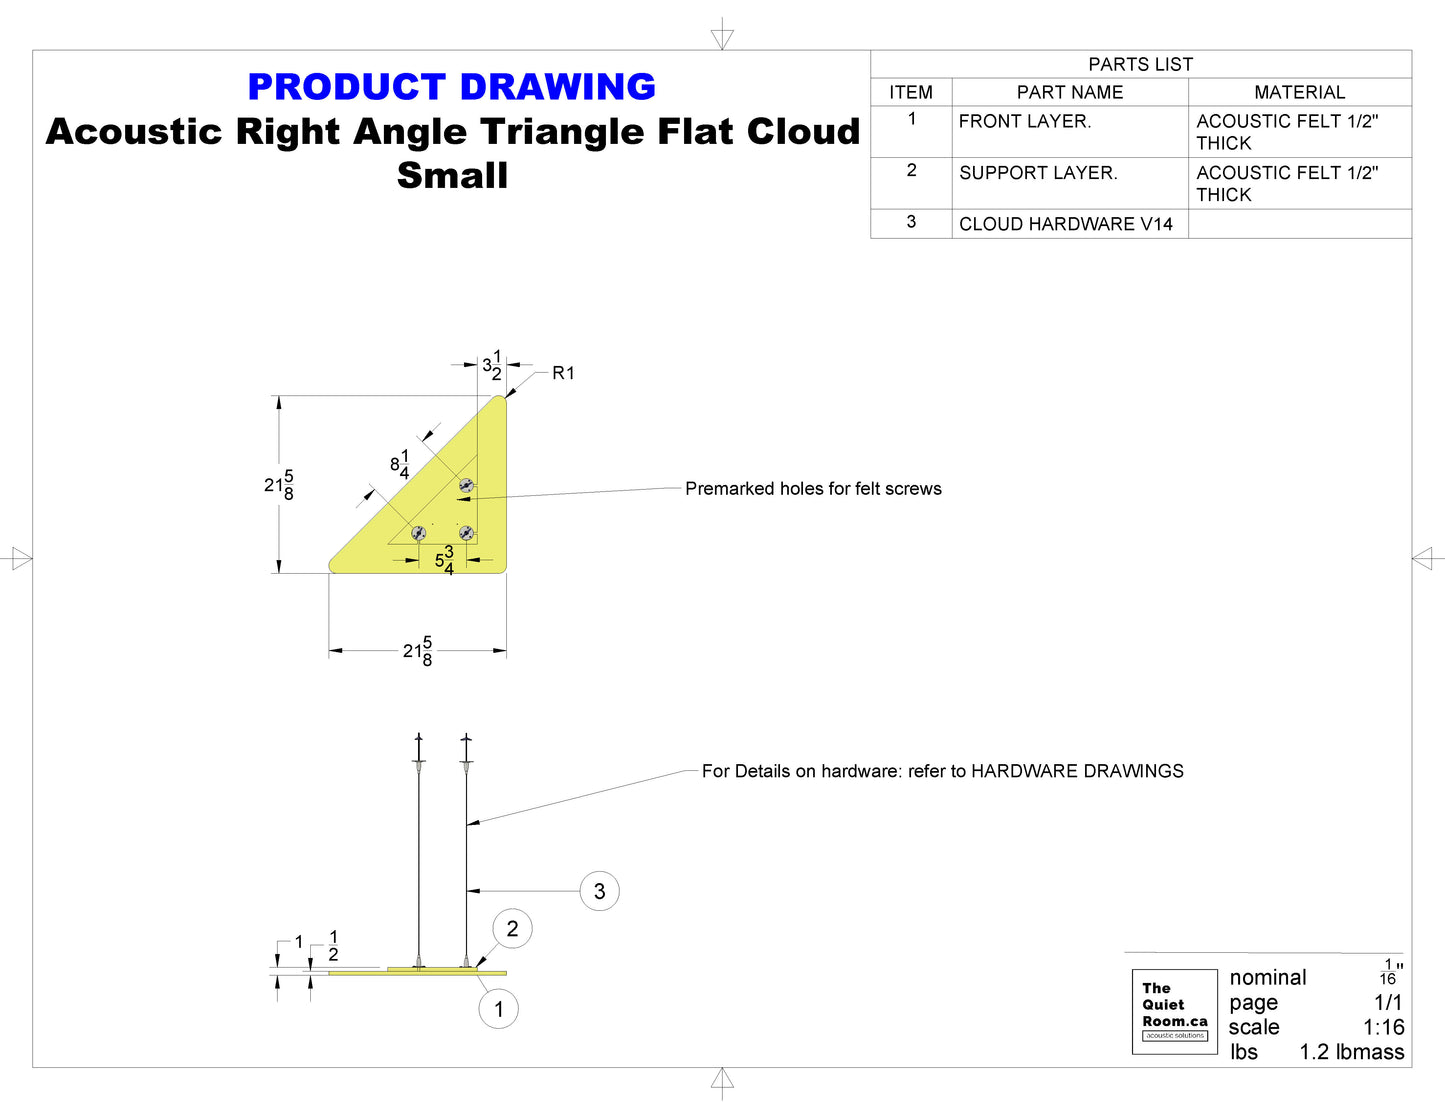 Acoustic Flat Cloud - Small Right Angle Triangle